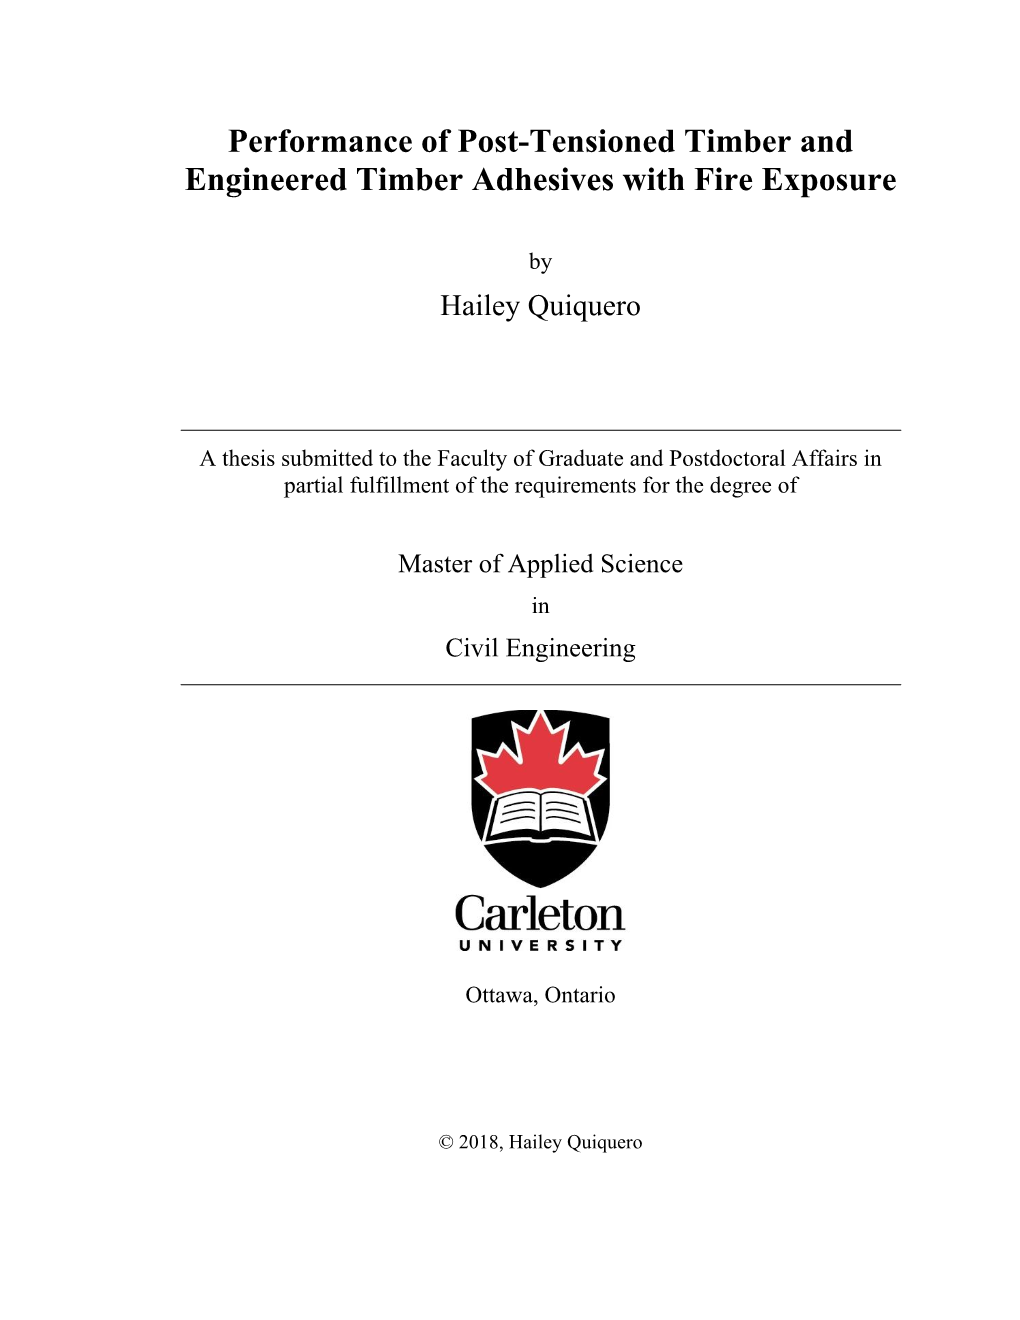 Performance of Post-Tensioned Timber and Engineered Timber Adhesives with Fire Exposure